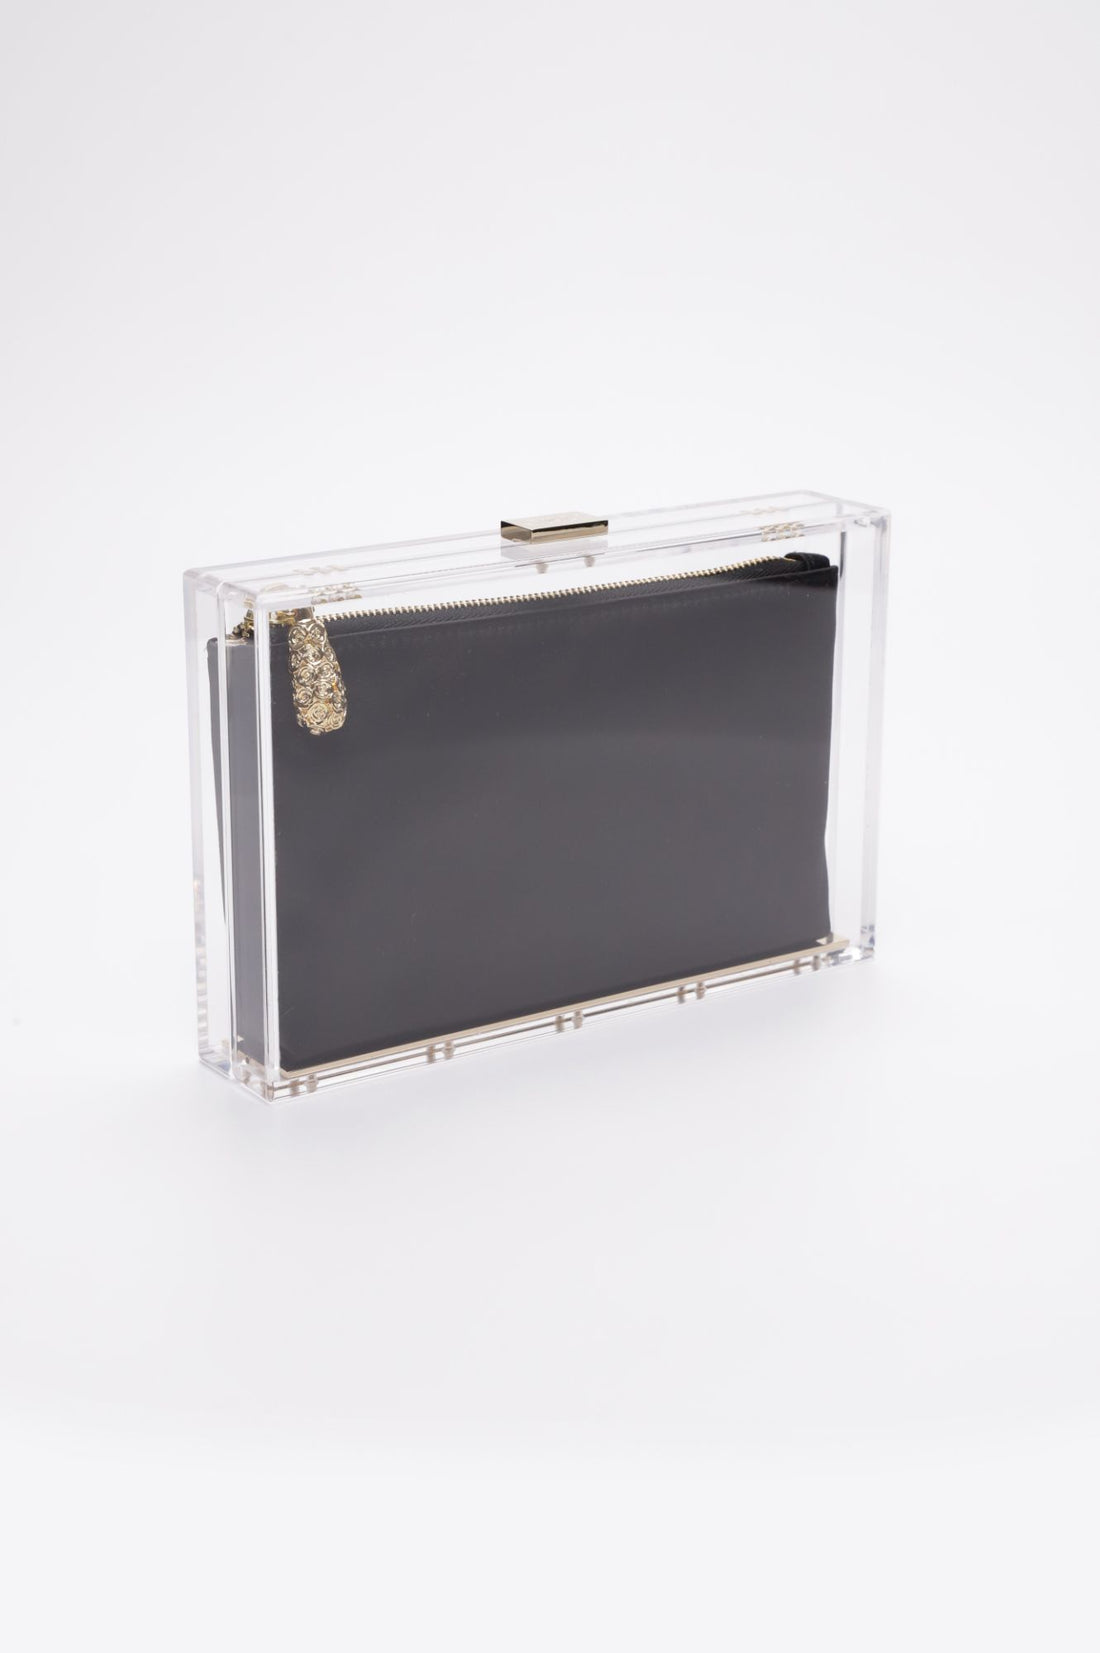 Side angle of the Mia Clutch with a clear acrylic rectangle body with a black satin interior pouch.